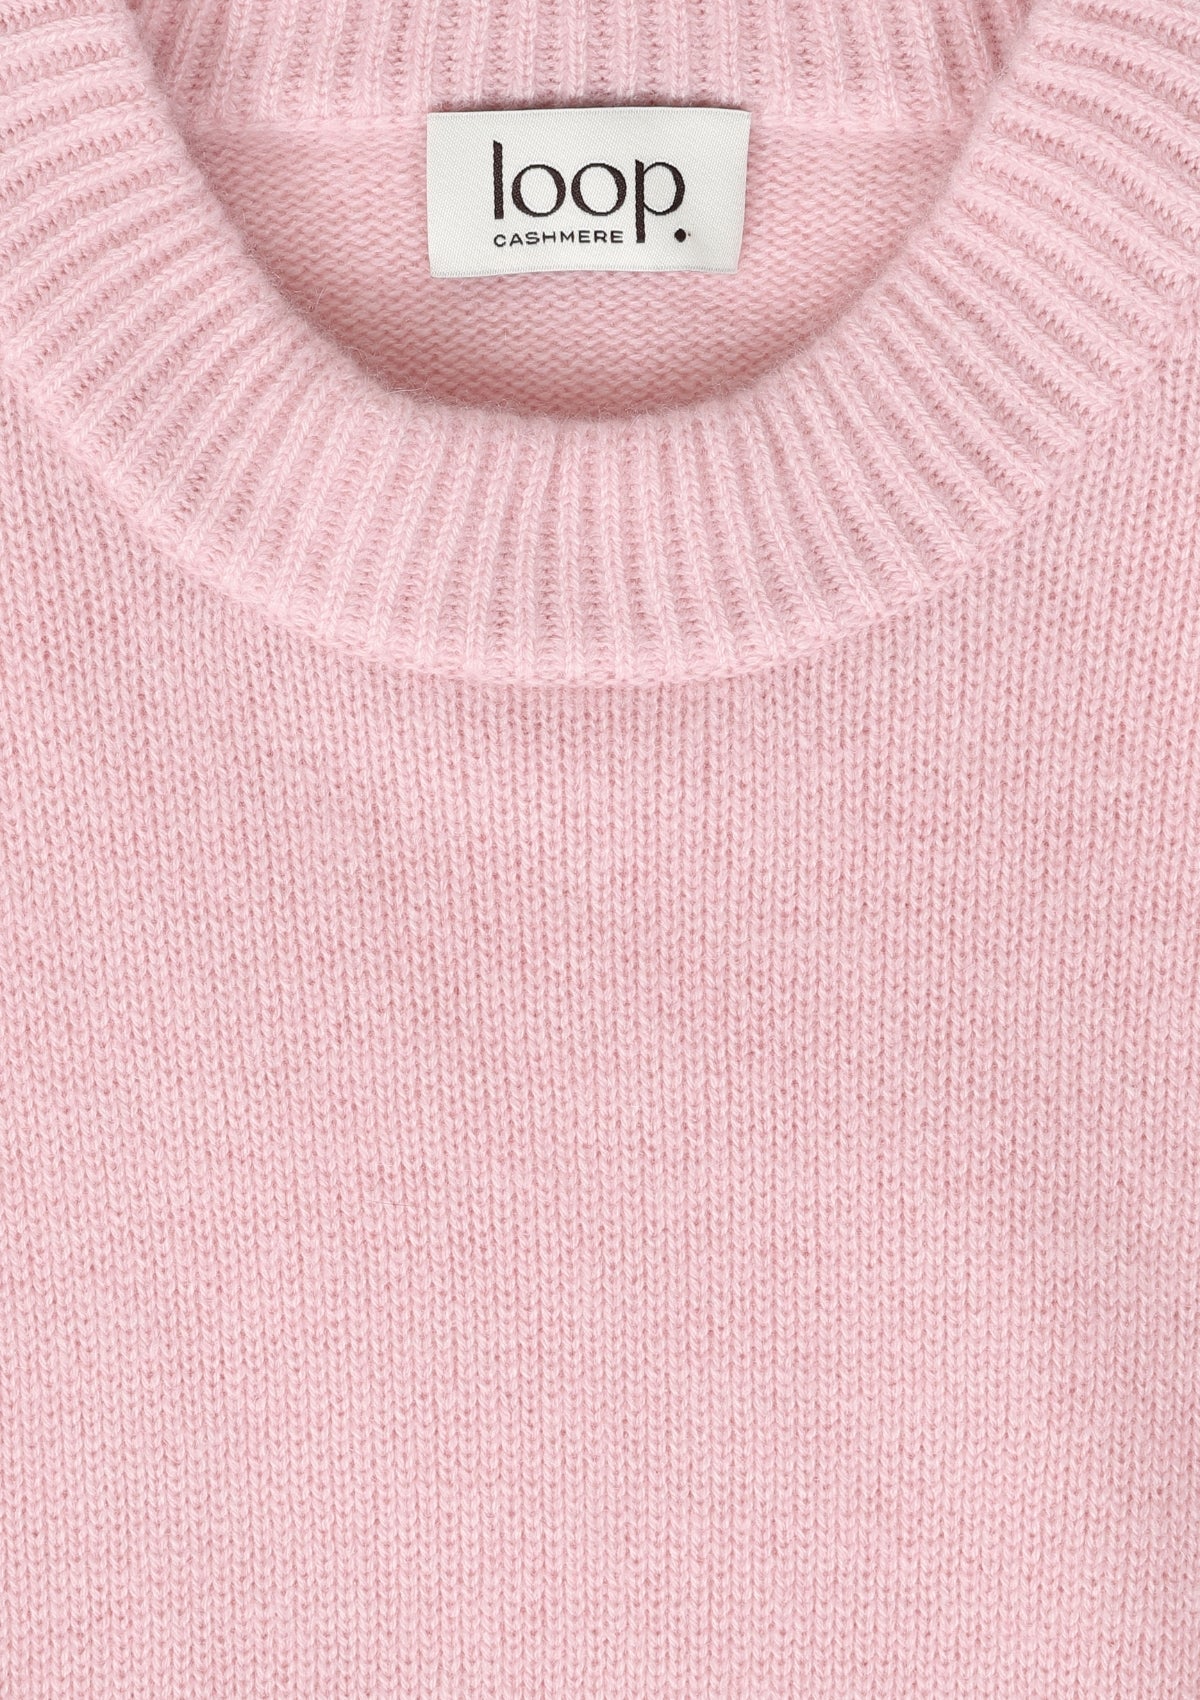 Cropped Cashmere Sweatshirt in Pixie Pink